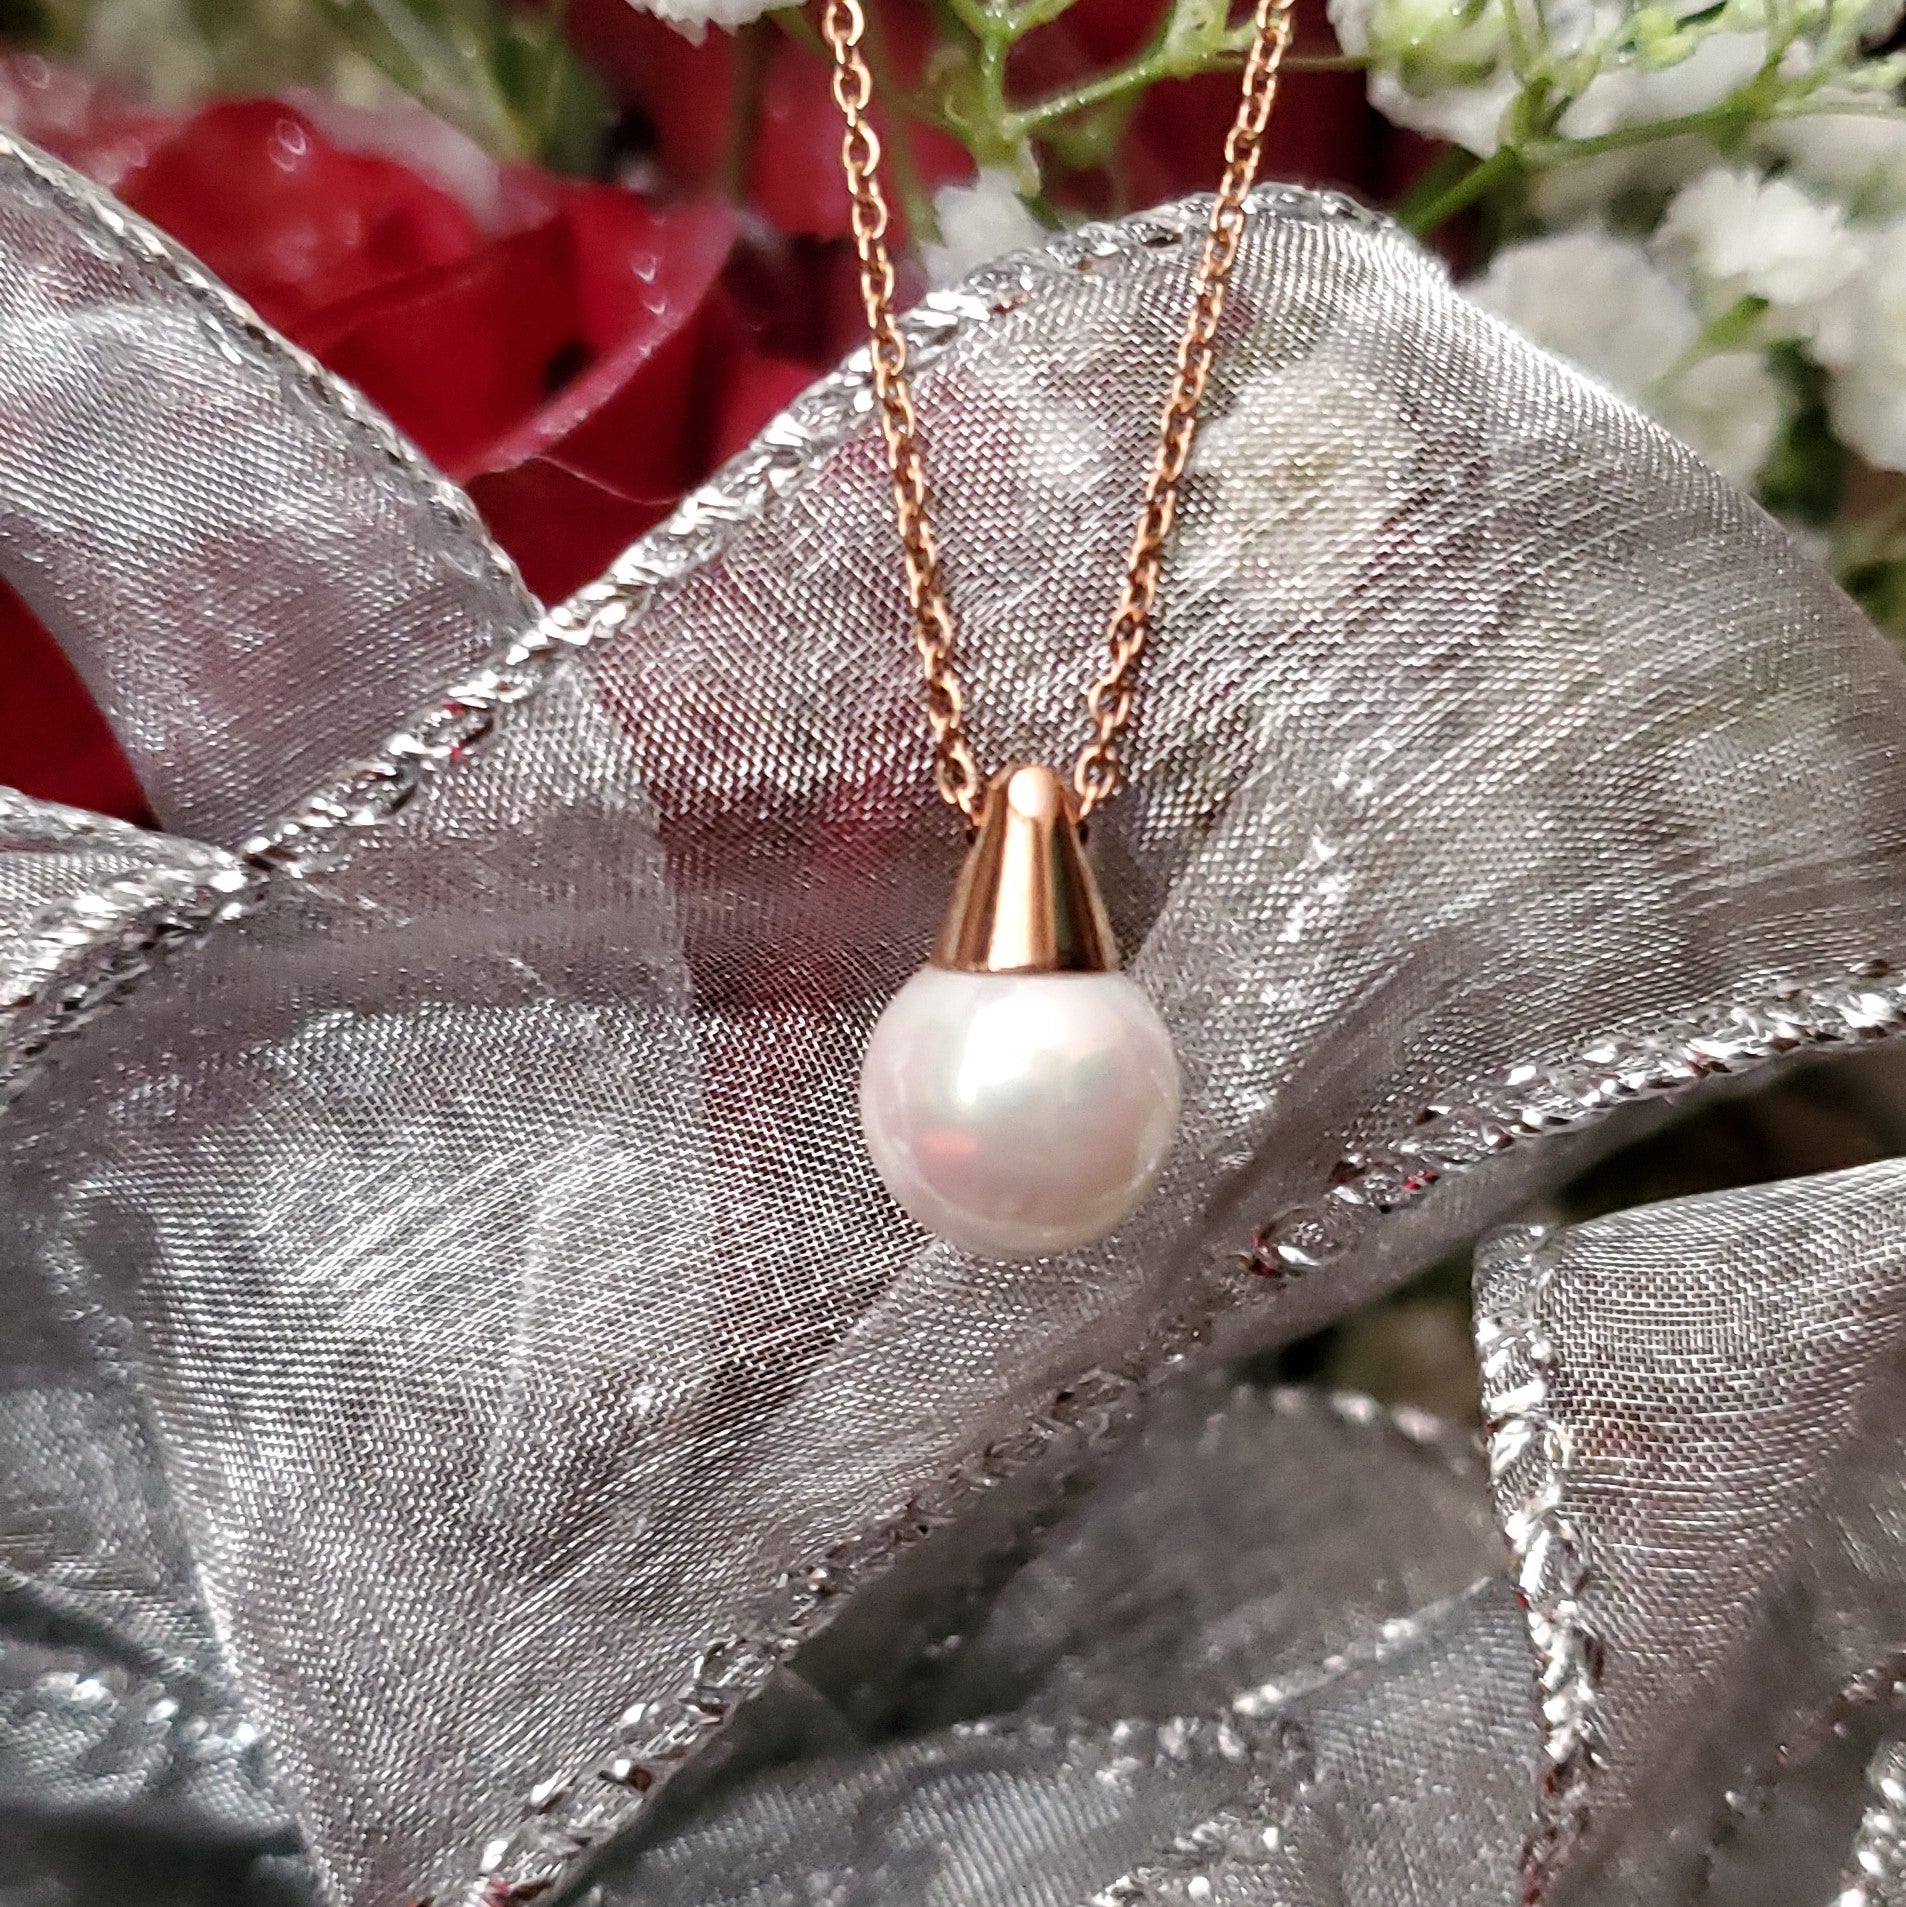 Women's Unique Stainless Steel Rose Gold Pearl Pendant Necklace